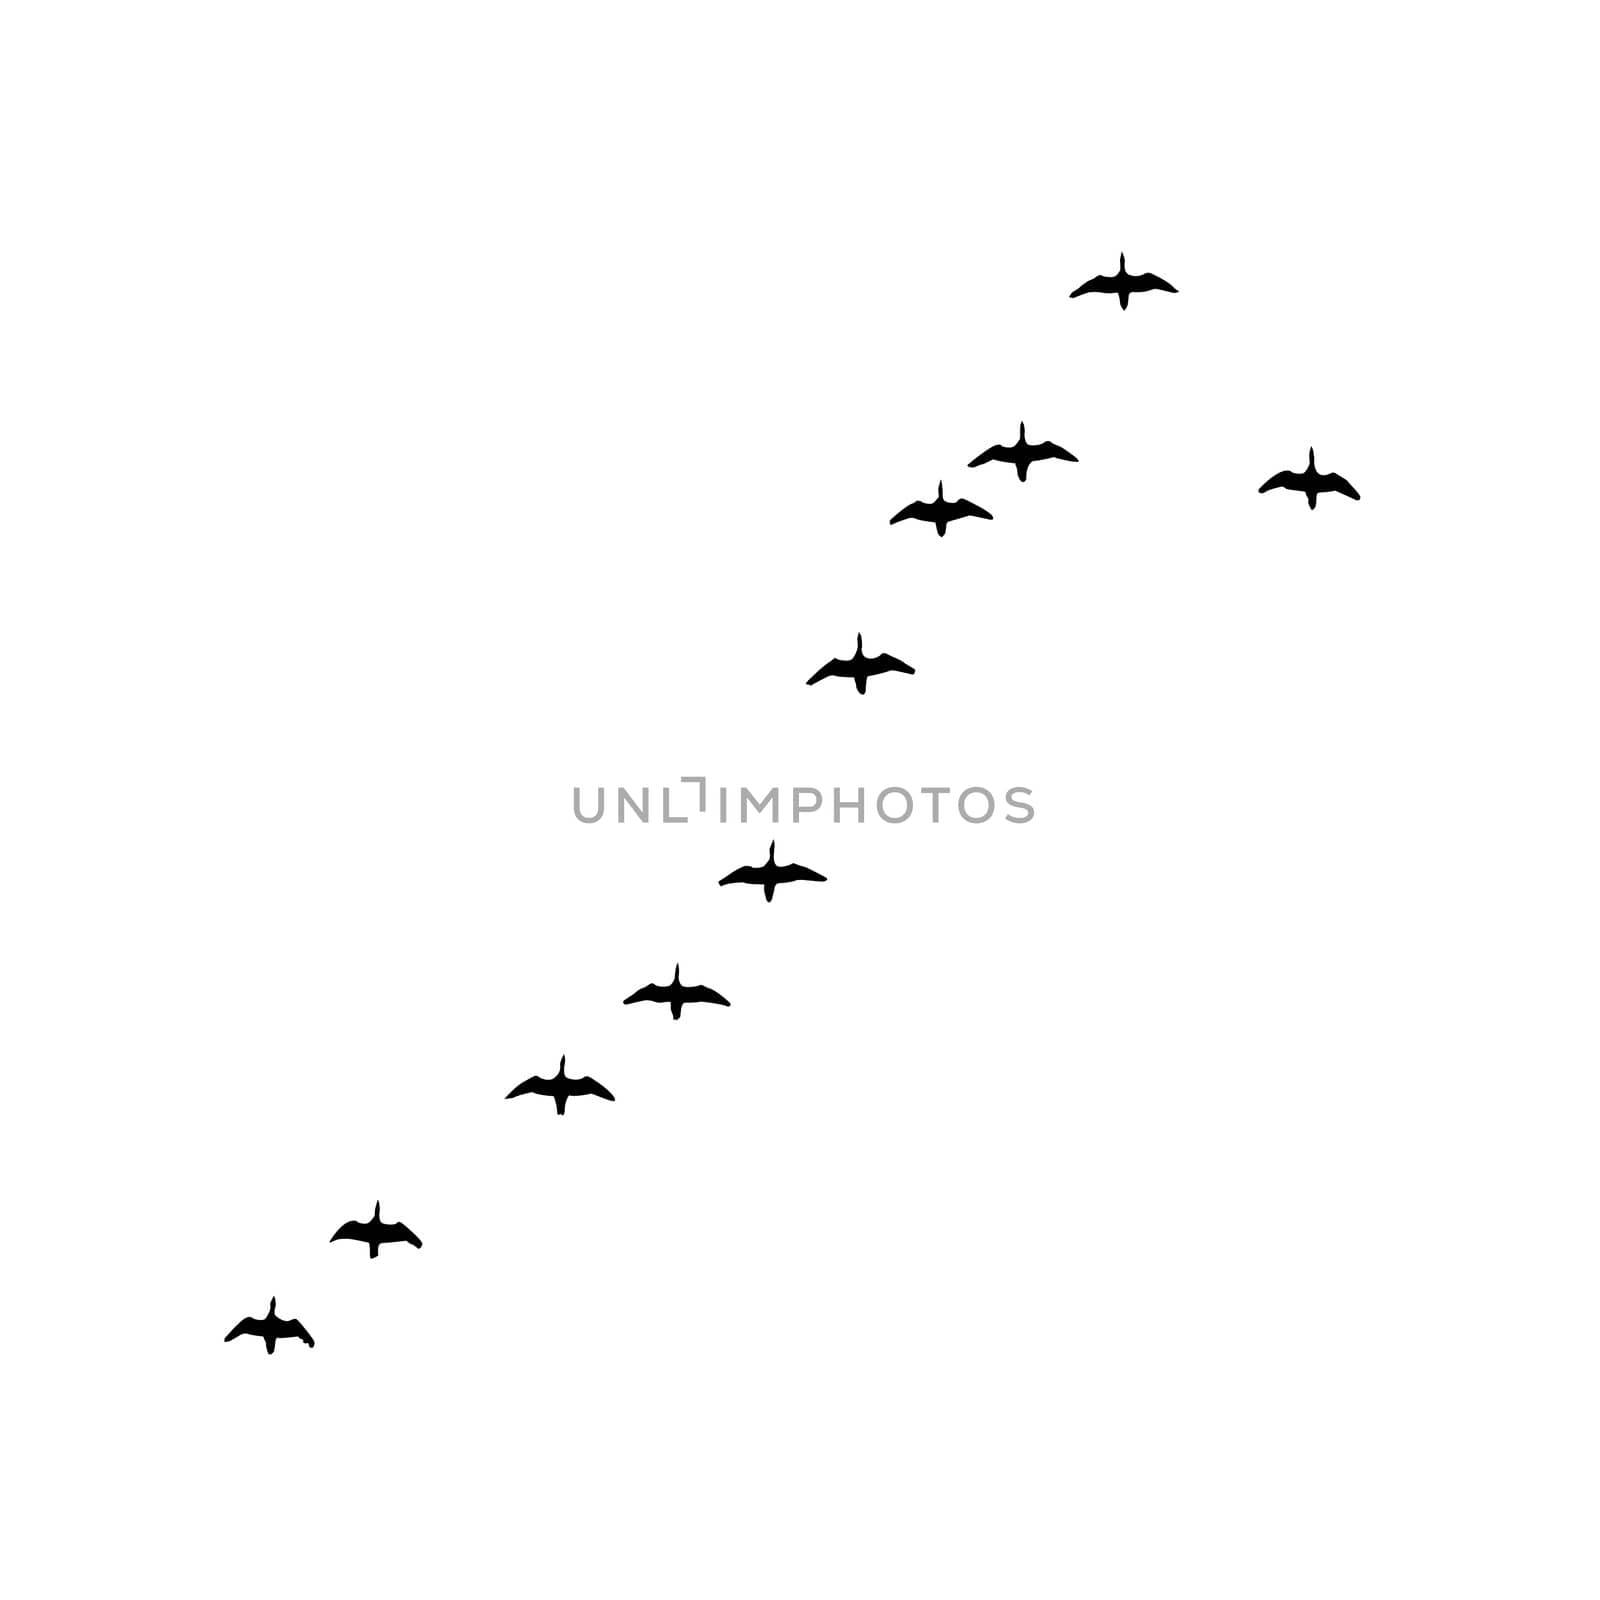 vector silhouette flock geese on white background